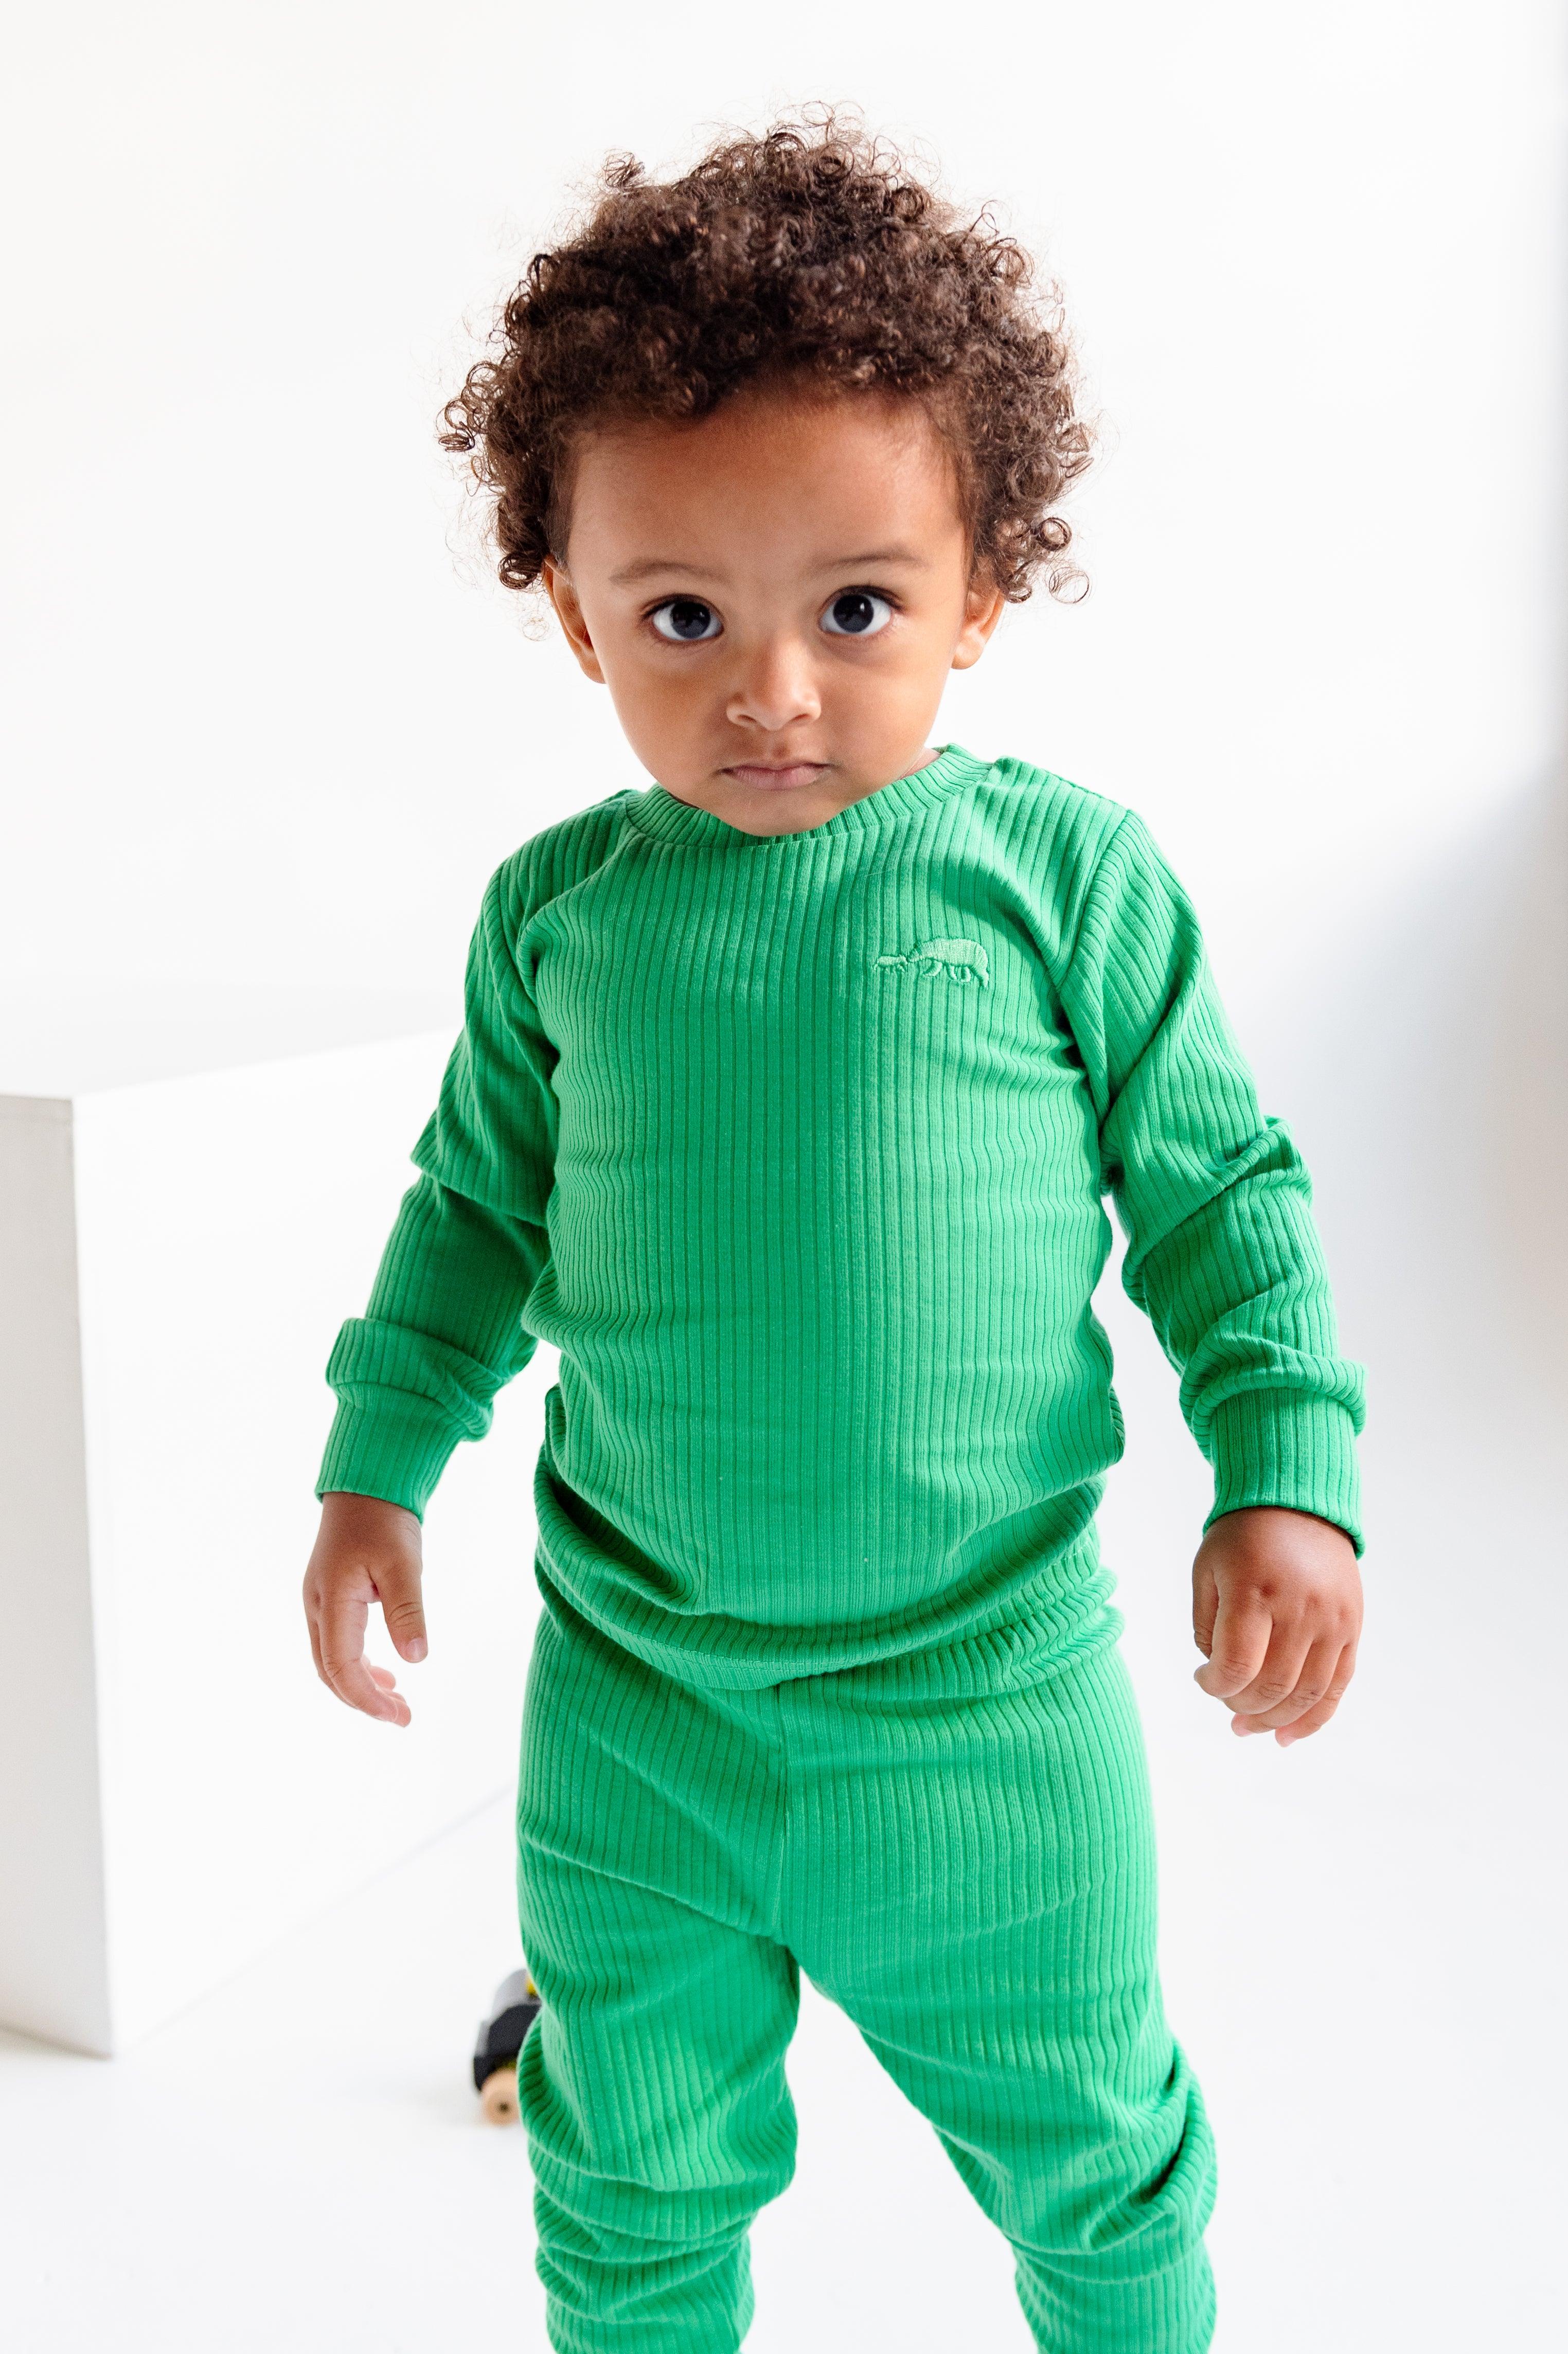 files/grass-green-ribbed-long-sleeve-top-claybearofficial-6.jpg